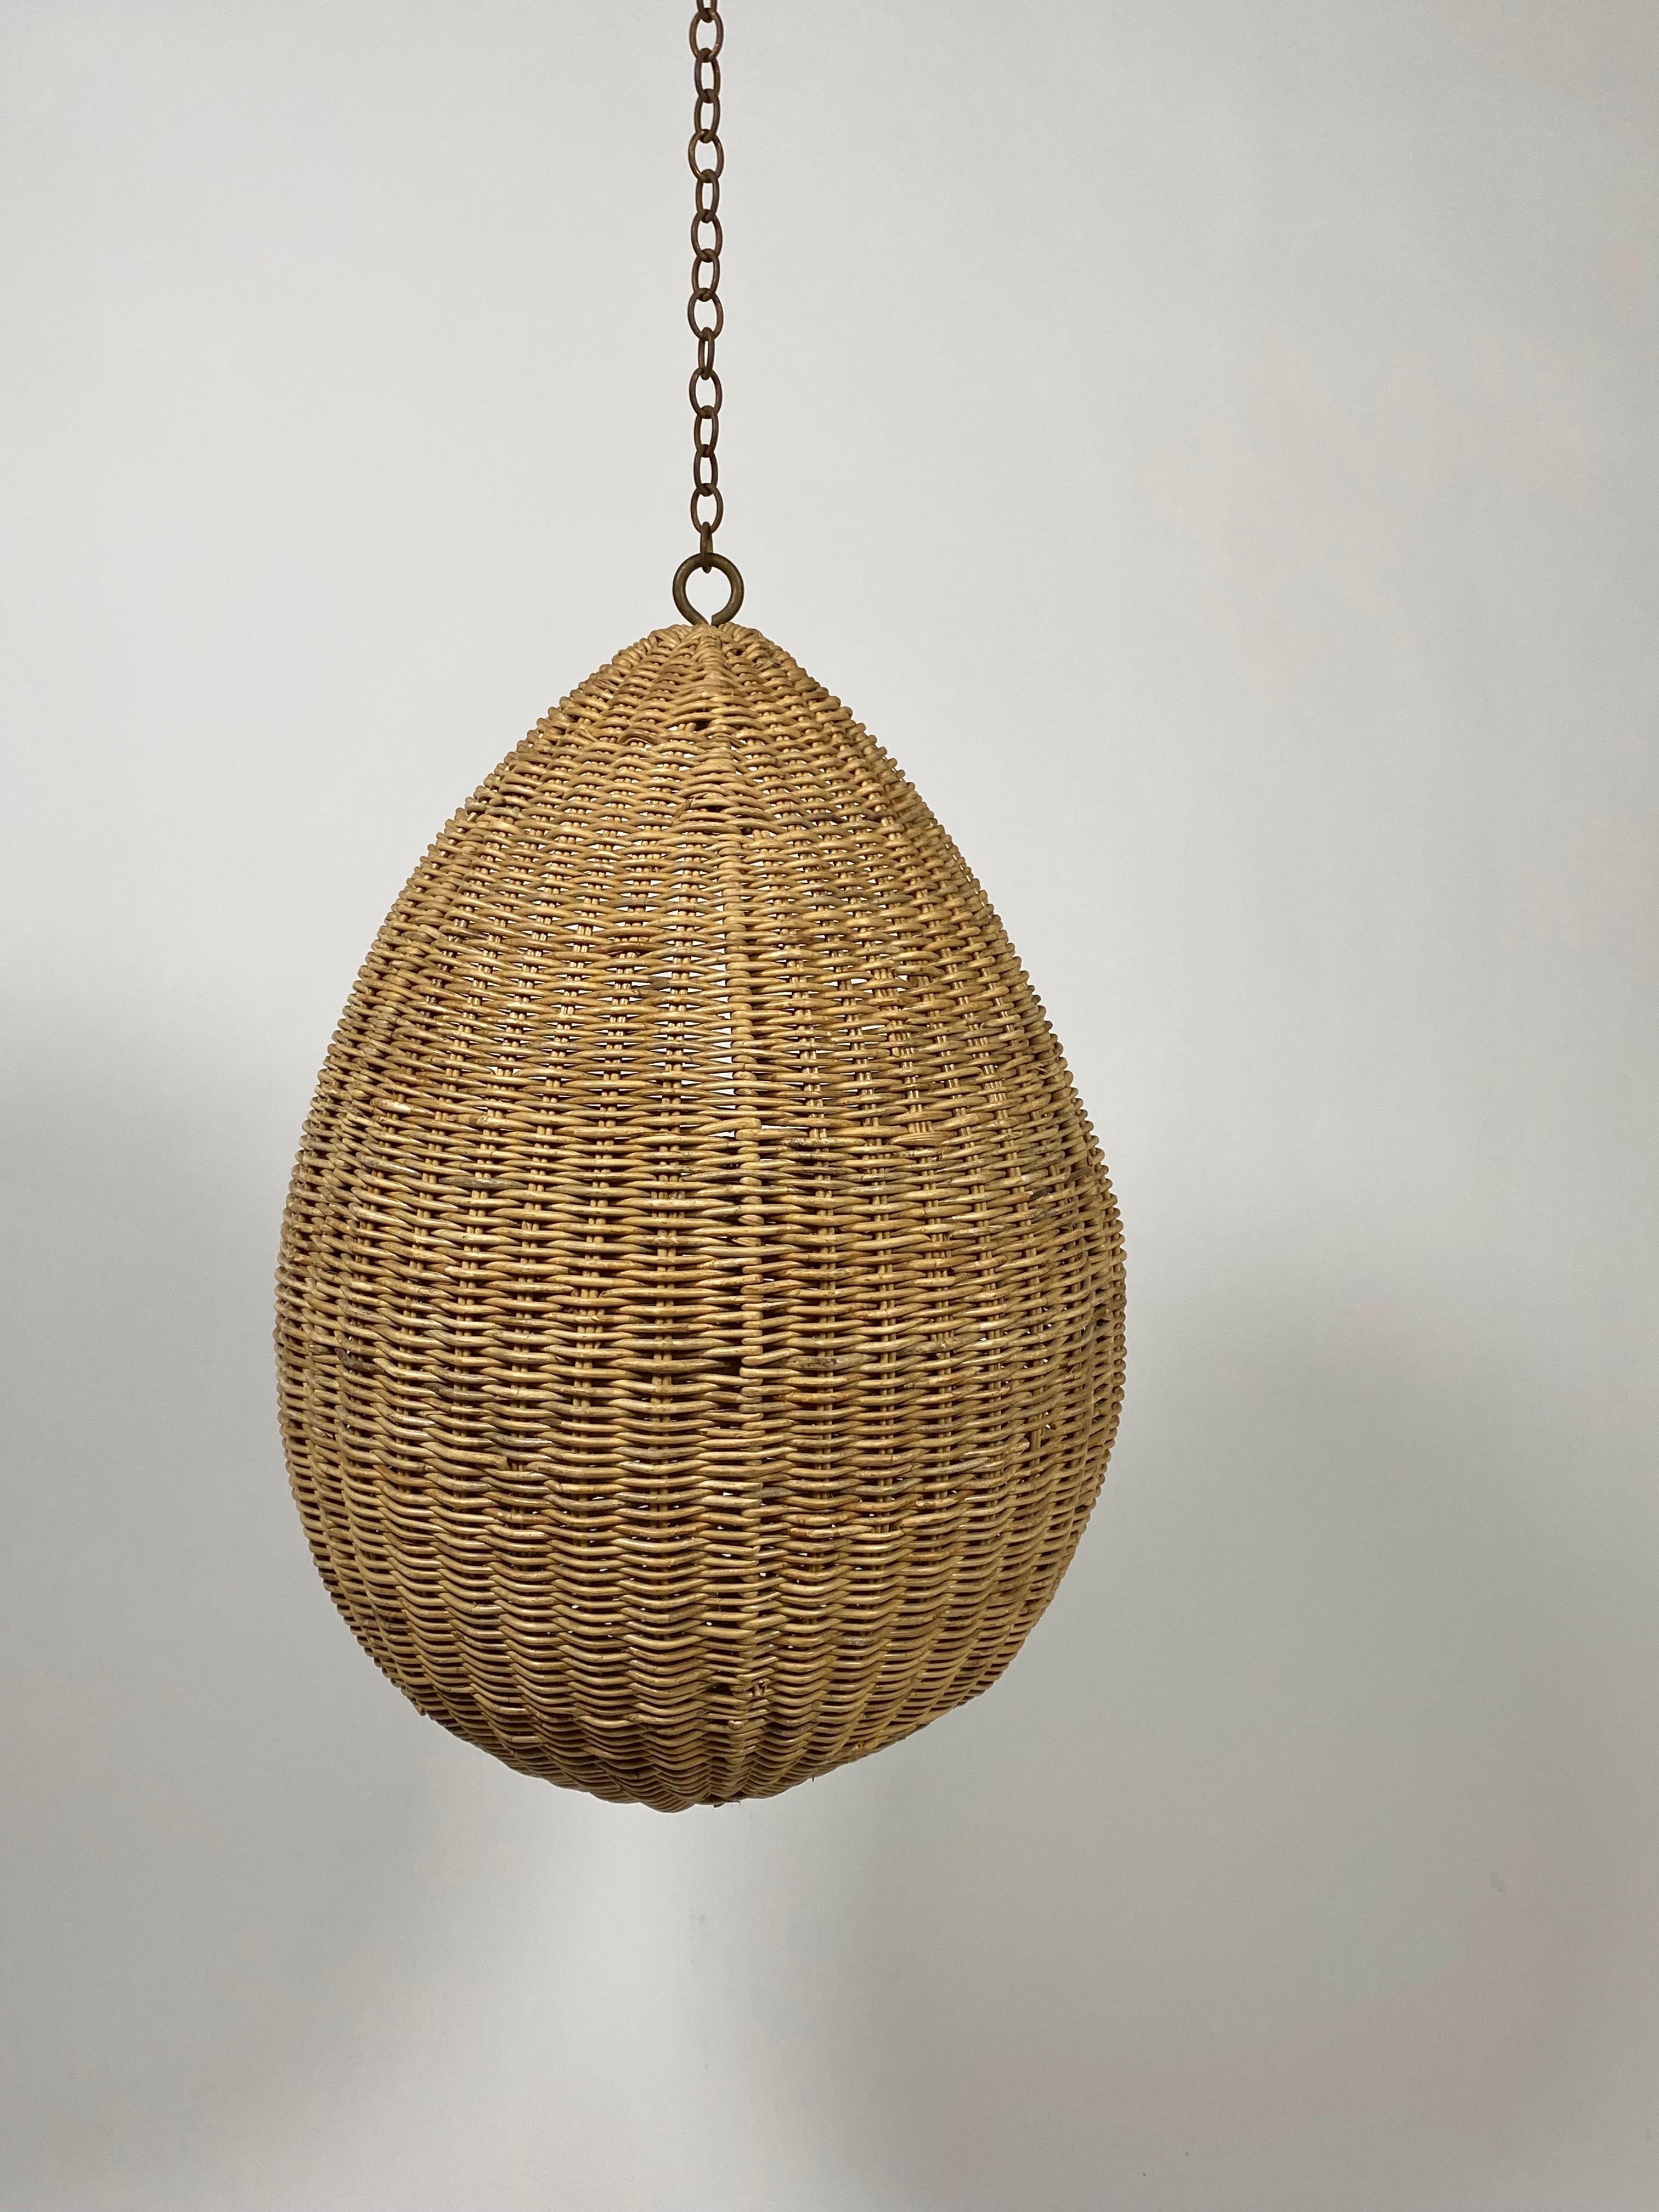 Unknown 1960s, Hanging Teardrop Shaped Rattan Cat House / Bed